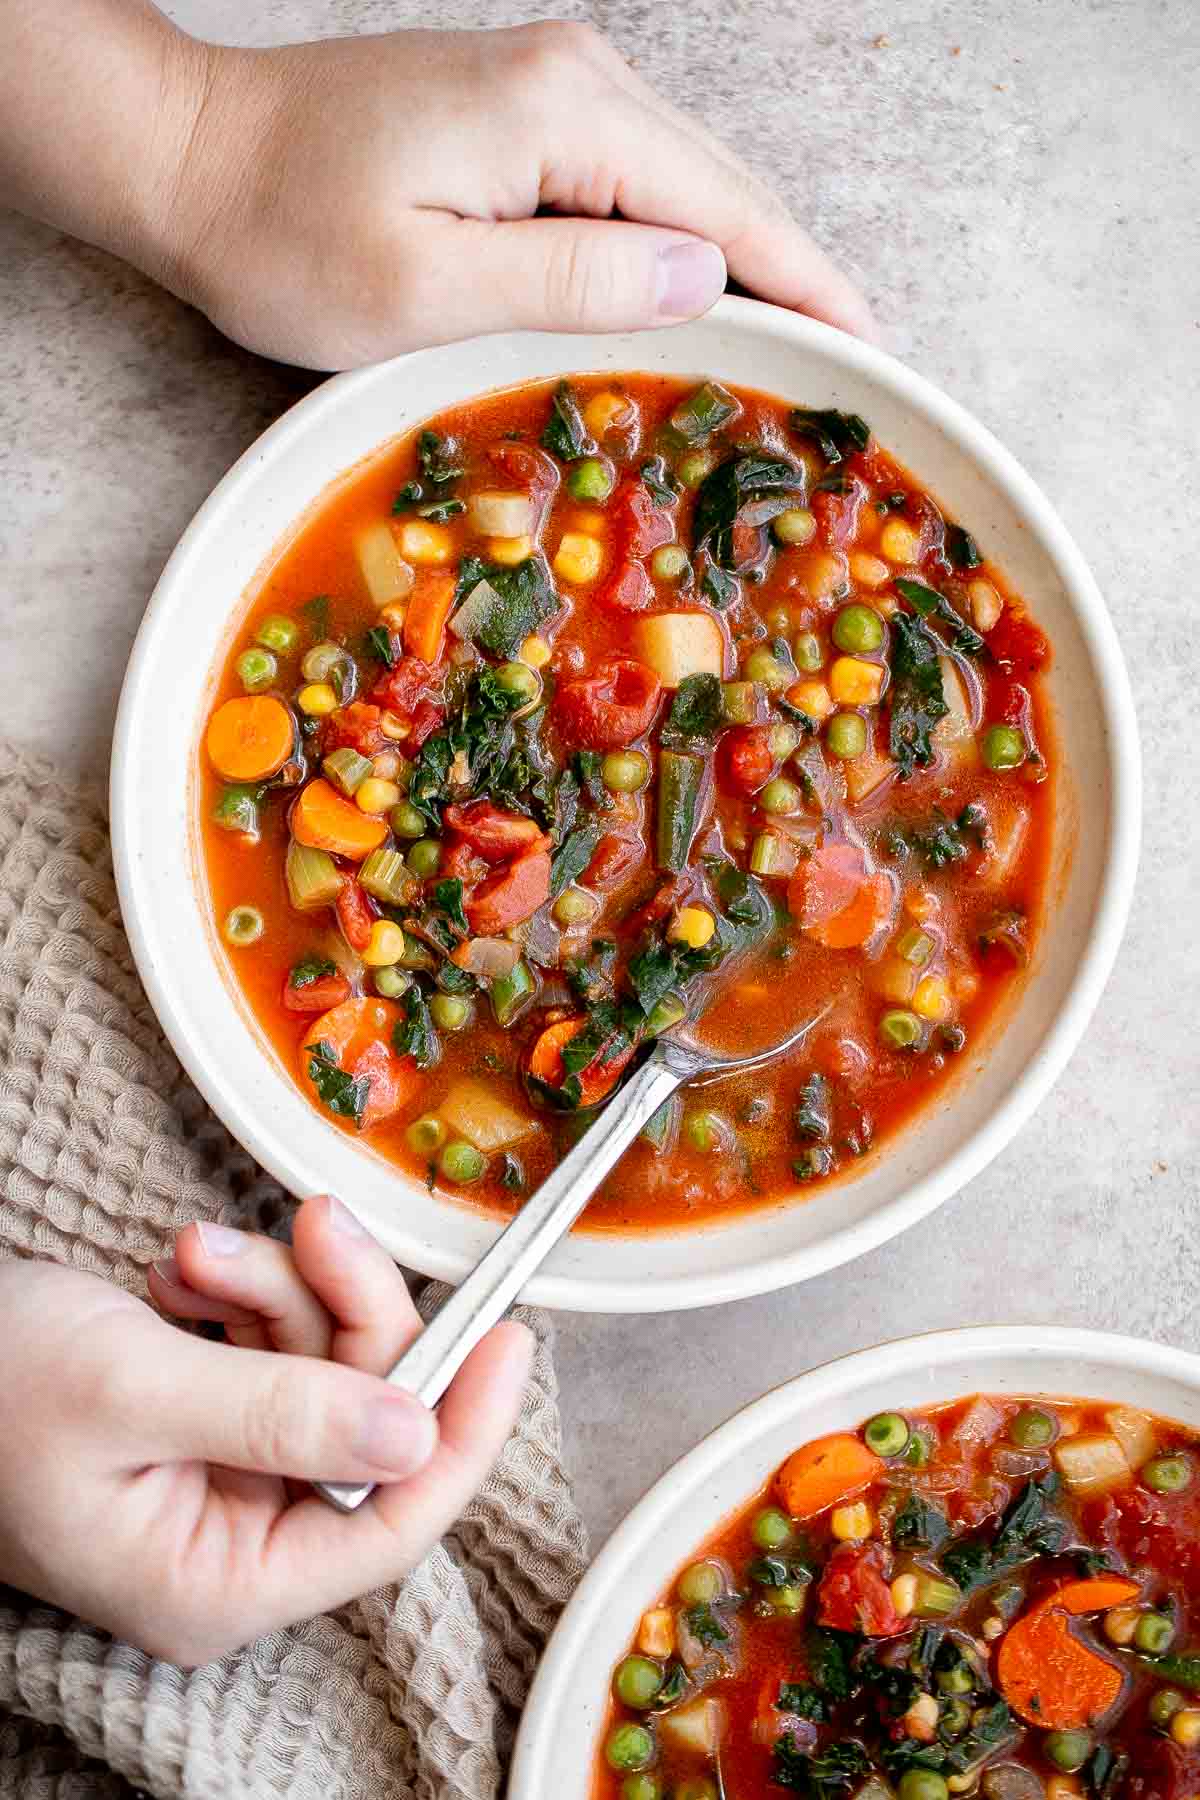 Vegetable Soup is a hearty, vegan soup that is delicious, flavorful, and easy to make. It’s loaded with all kinds of veggies in a savory broth. | aheadofthyme.com